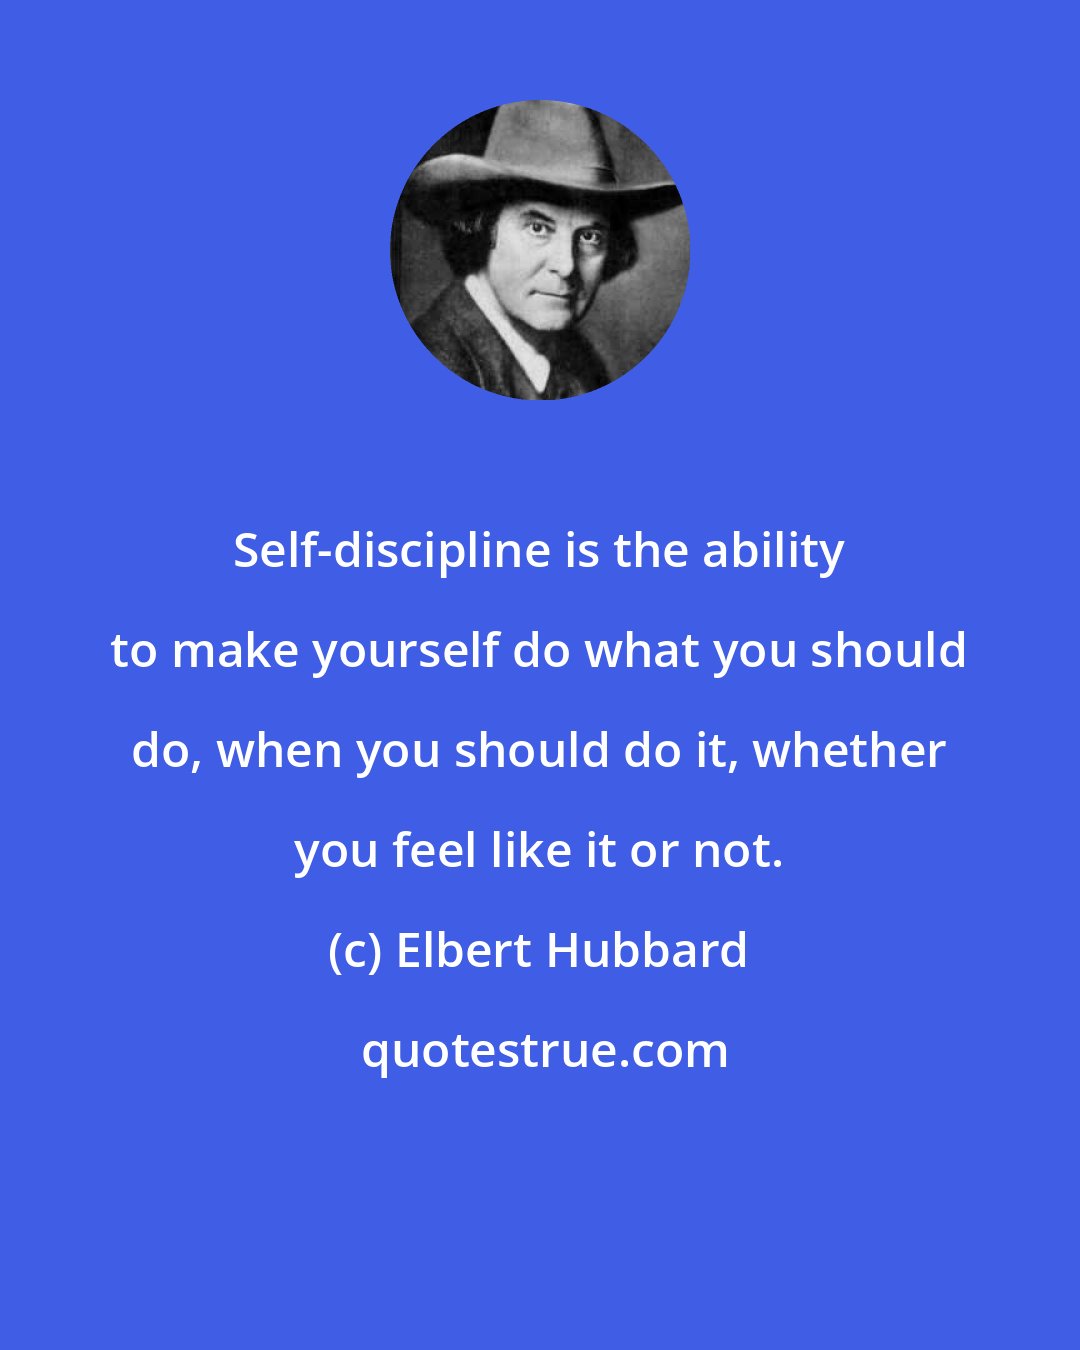 Elbert Hubbard: Self-discipline is the ability to make yourself do what you should do, when you should do it, whether you feel like it or not.